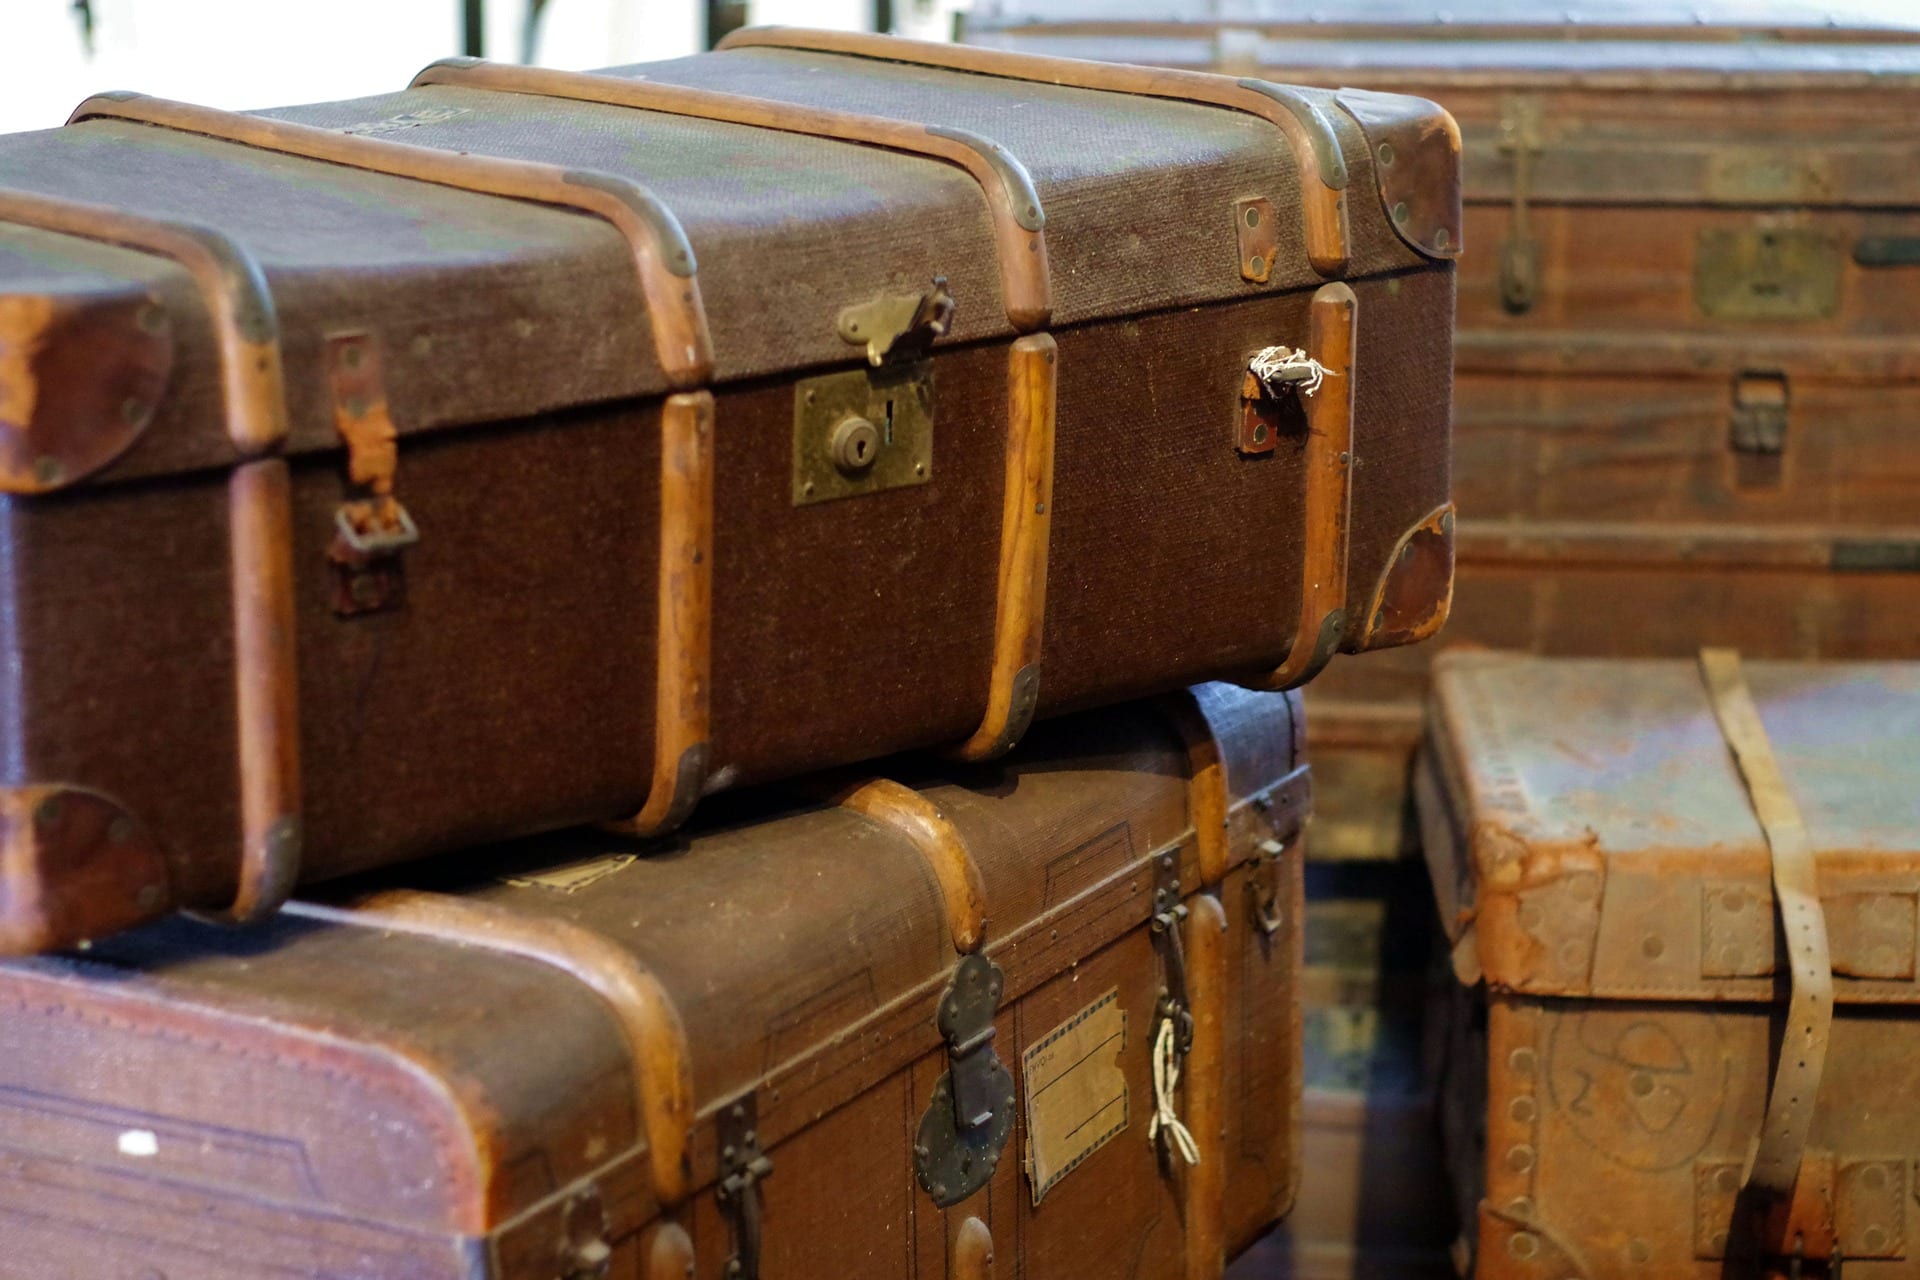 Why Should You Start Packing Early?